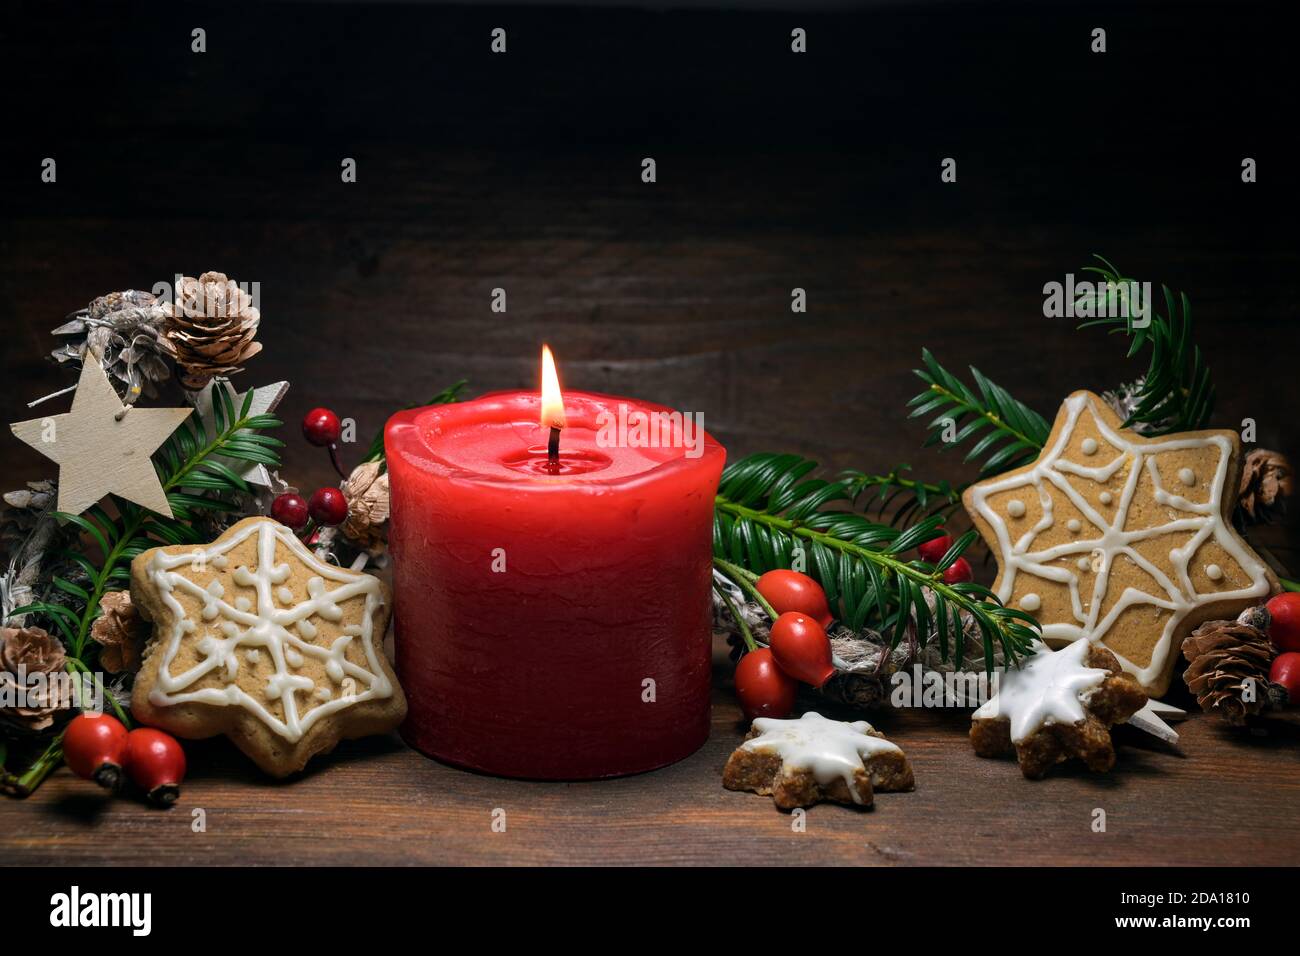 Christmas decoration with a red burning candle, gingerbread cookies, rose hips, branches and cones on a dark rustic wooden background, copy space, sel Stock Photo